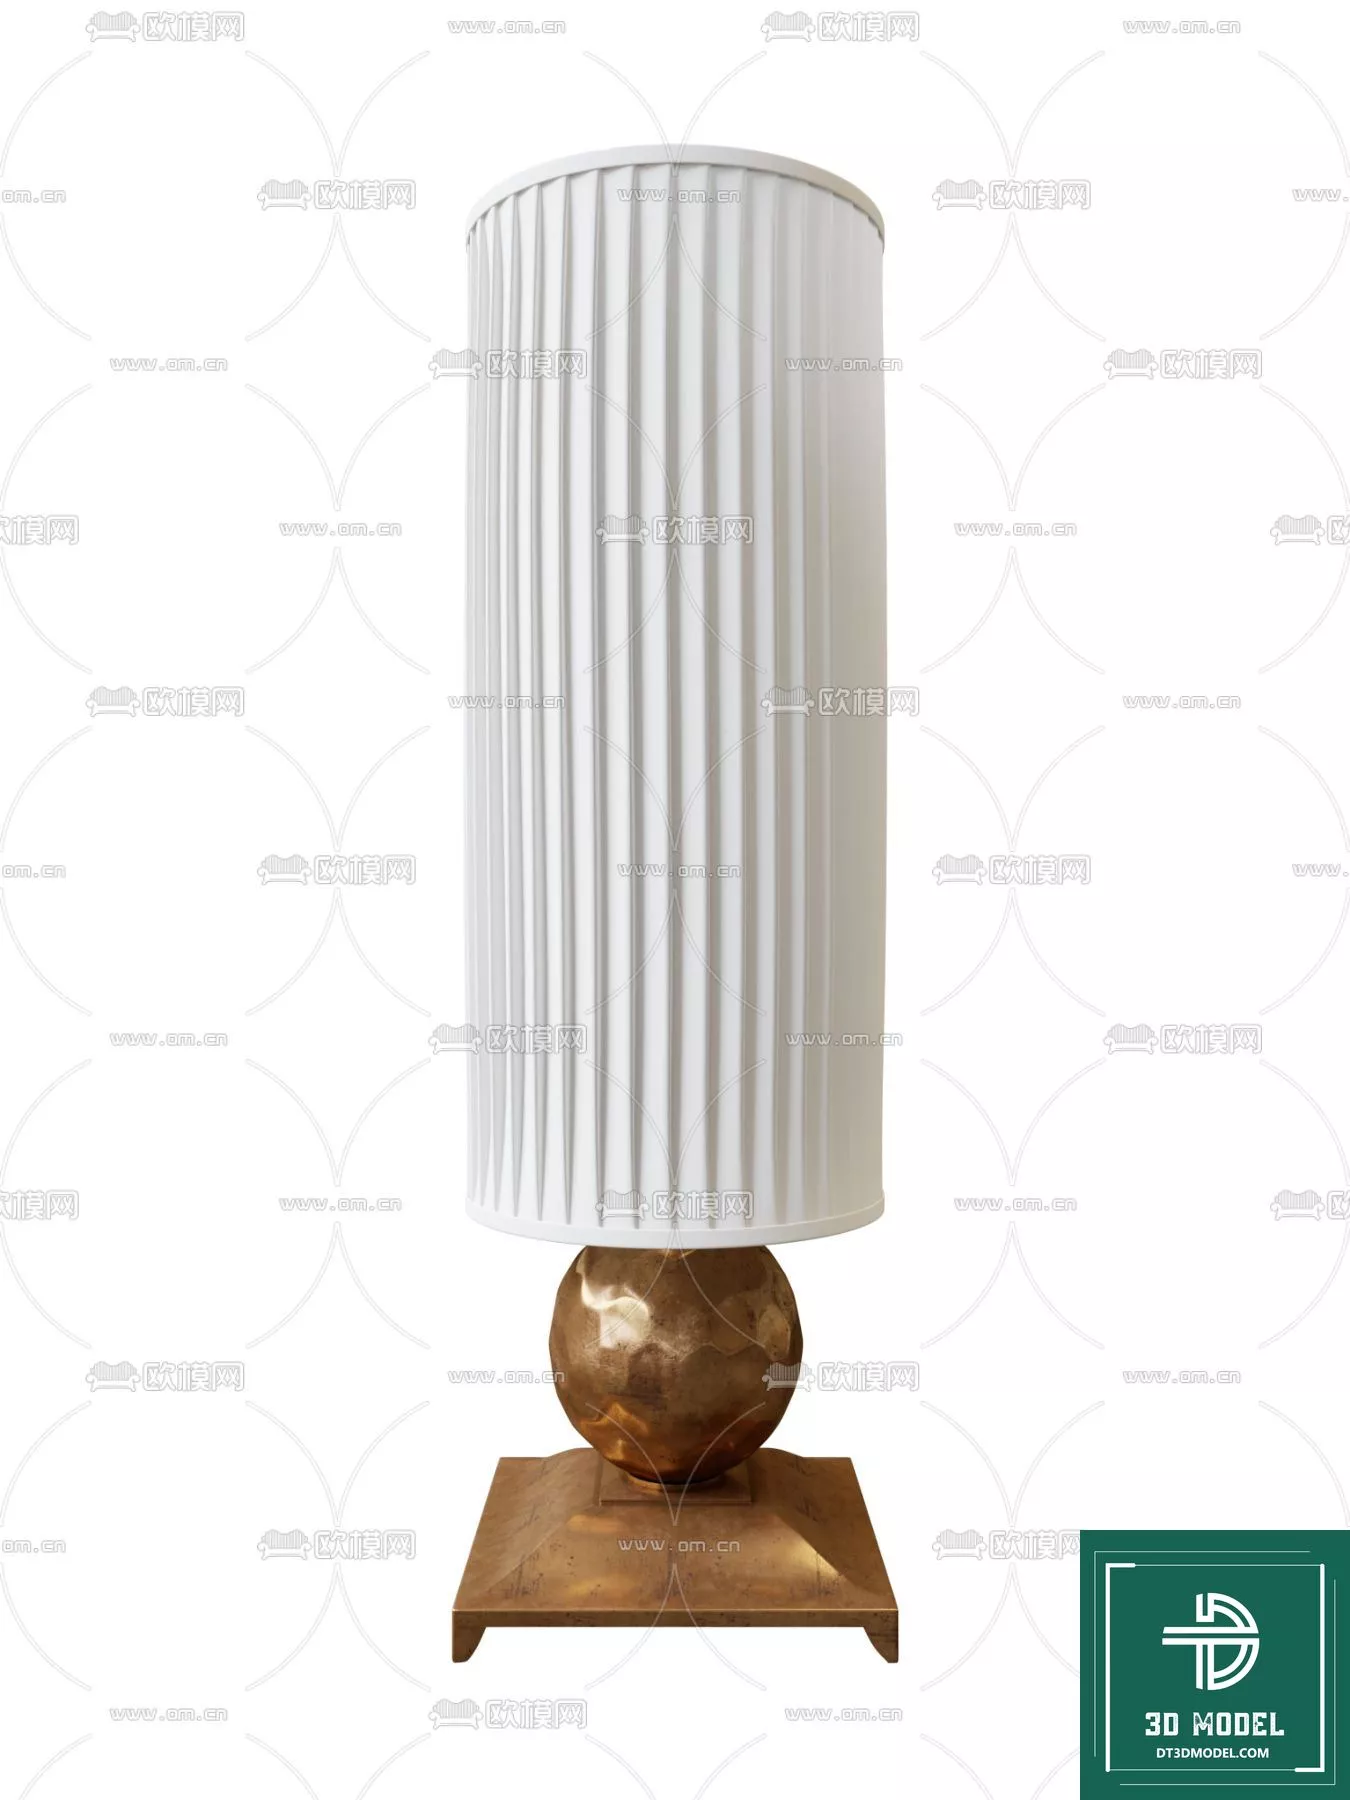 MODERN TABLE LAMP - SKETCHUP 3D MODEL - VRAY OR ENSCAPE - ID14634